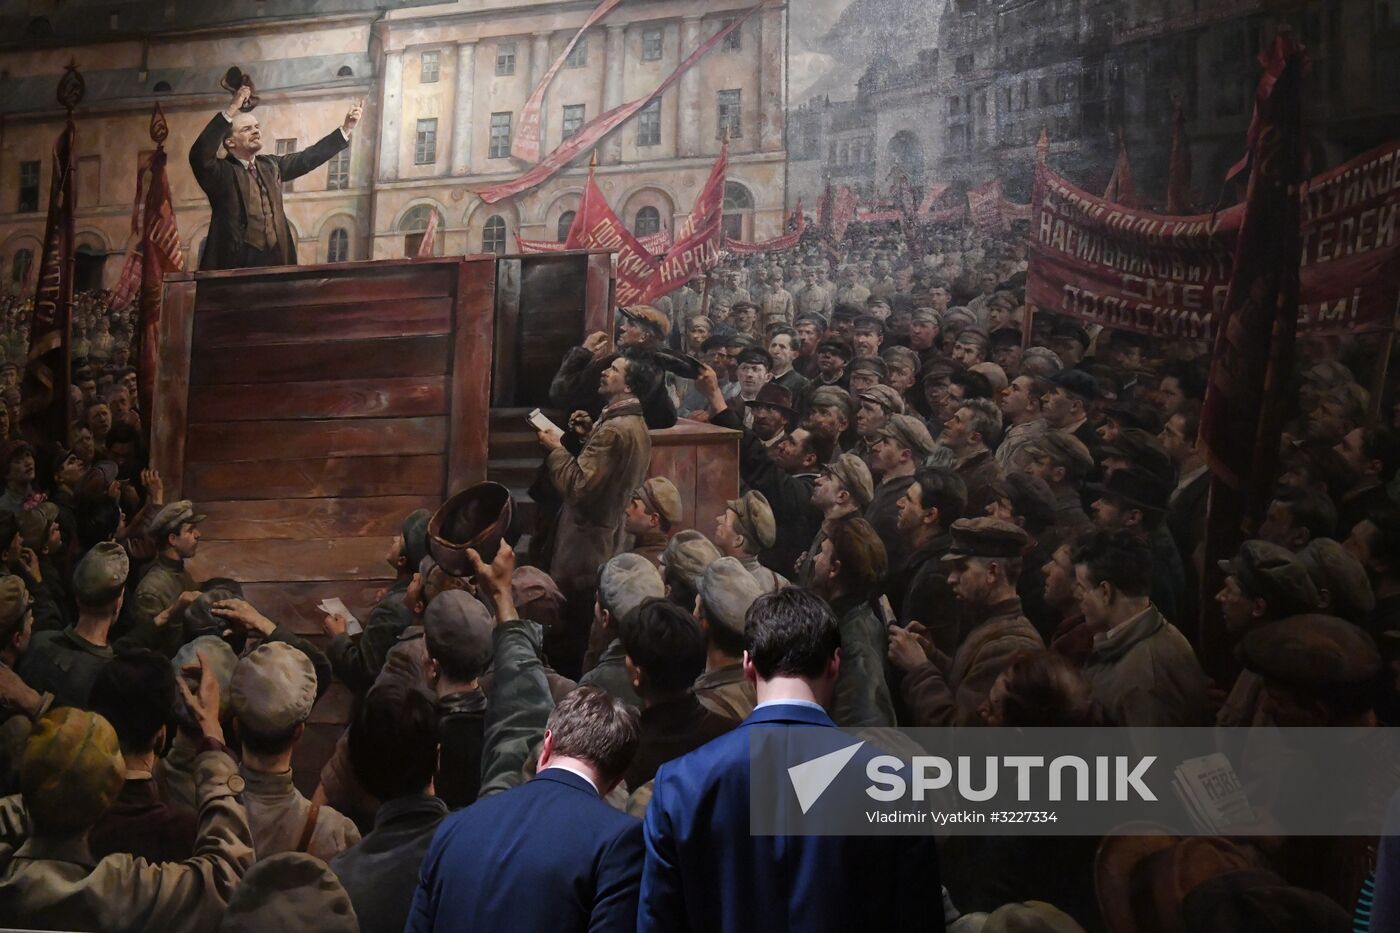 Exhibition "Energy of dream. Towards 100th anniversary of Great Russian Revolution"